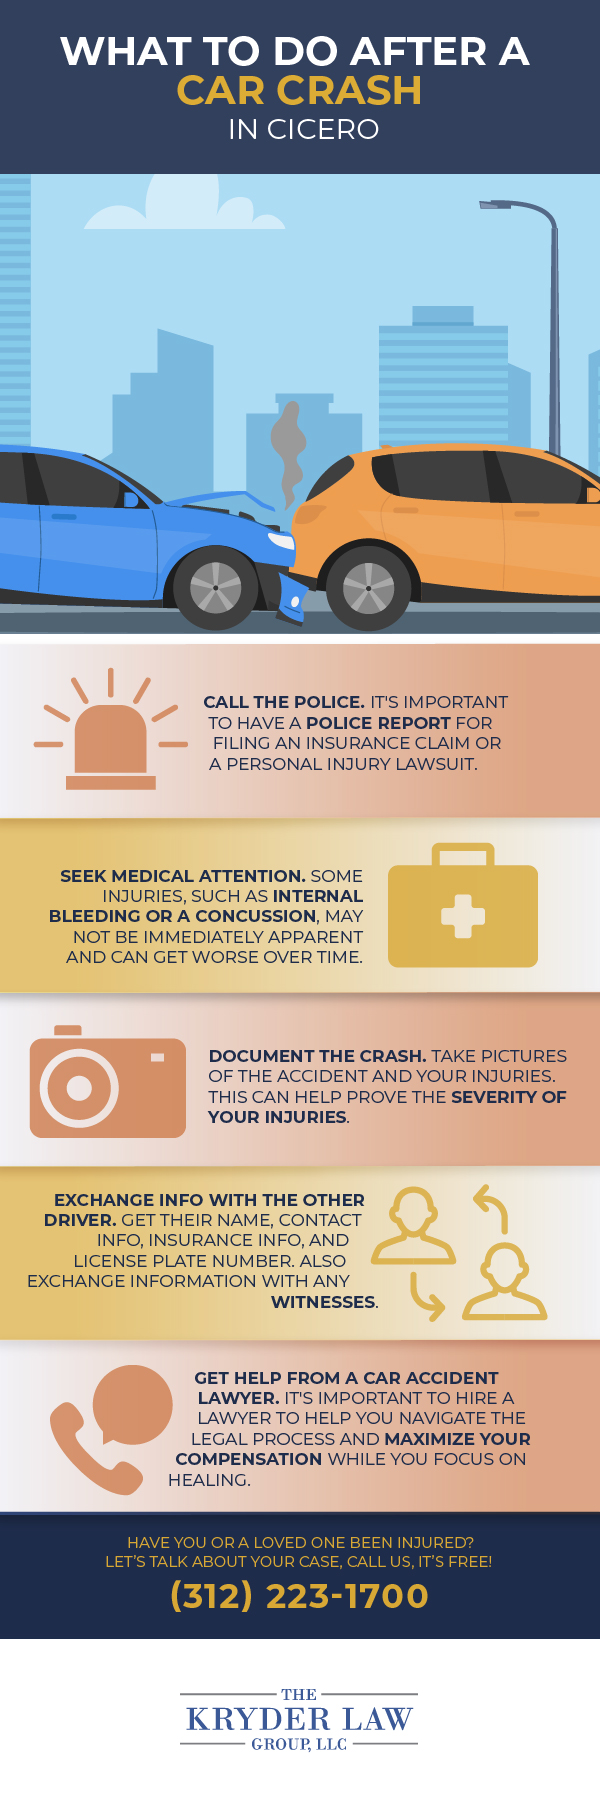 The Benefits of Hiring a Cicero Car Accident Lawyer Infographic